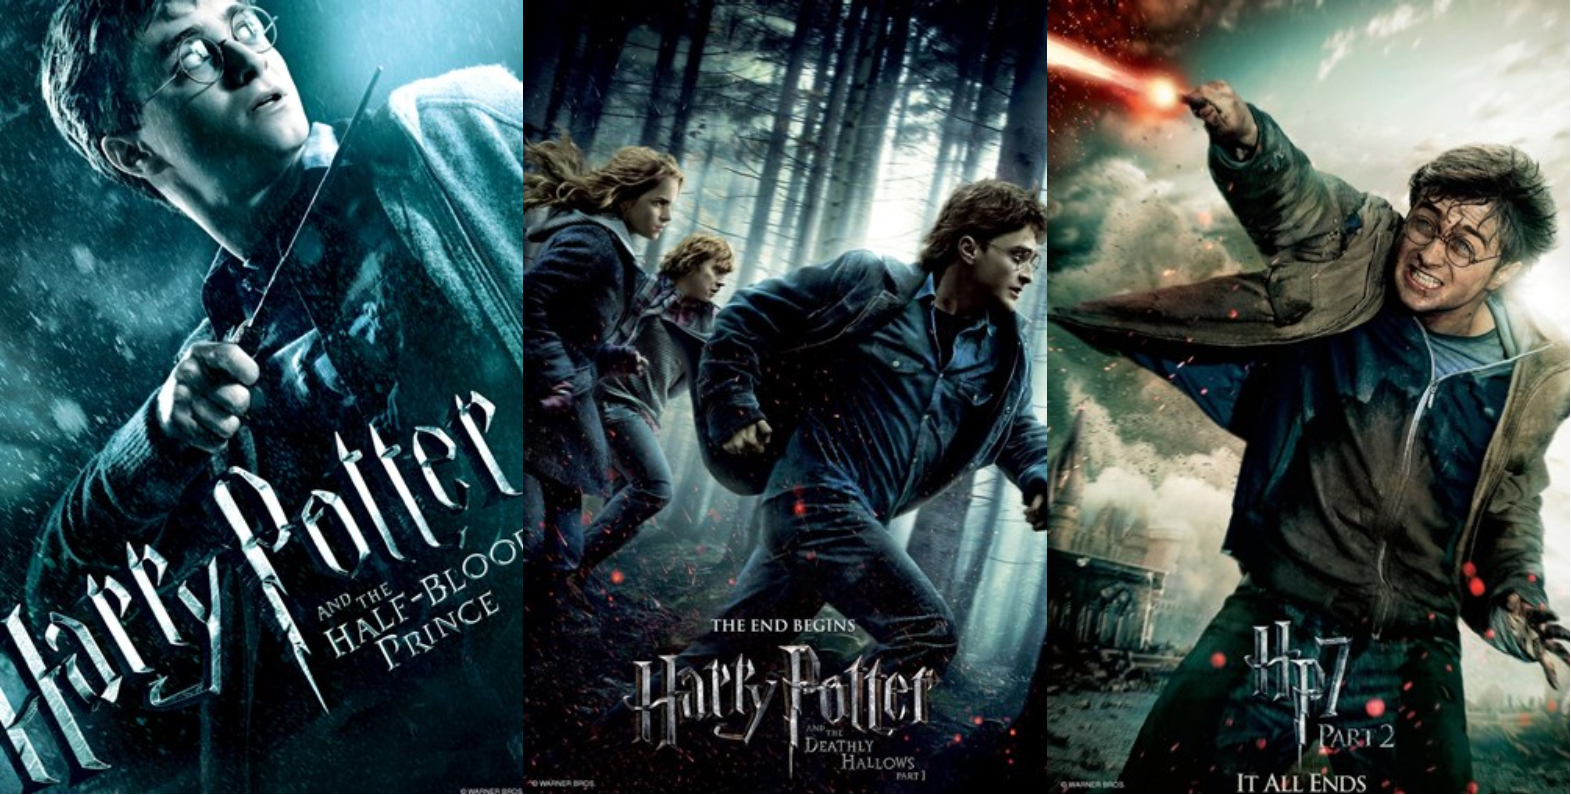 Movie covers for Harry Potter and the Half-Blood Prints and Harry Potter and the Deathly Hallows Parts 1 and 2